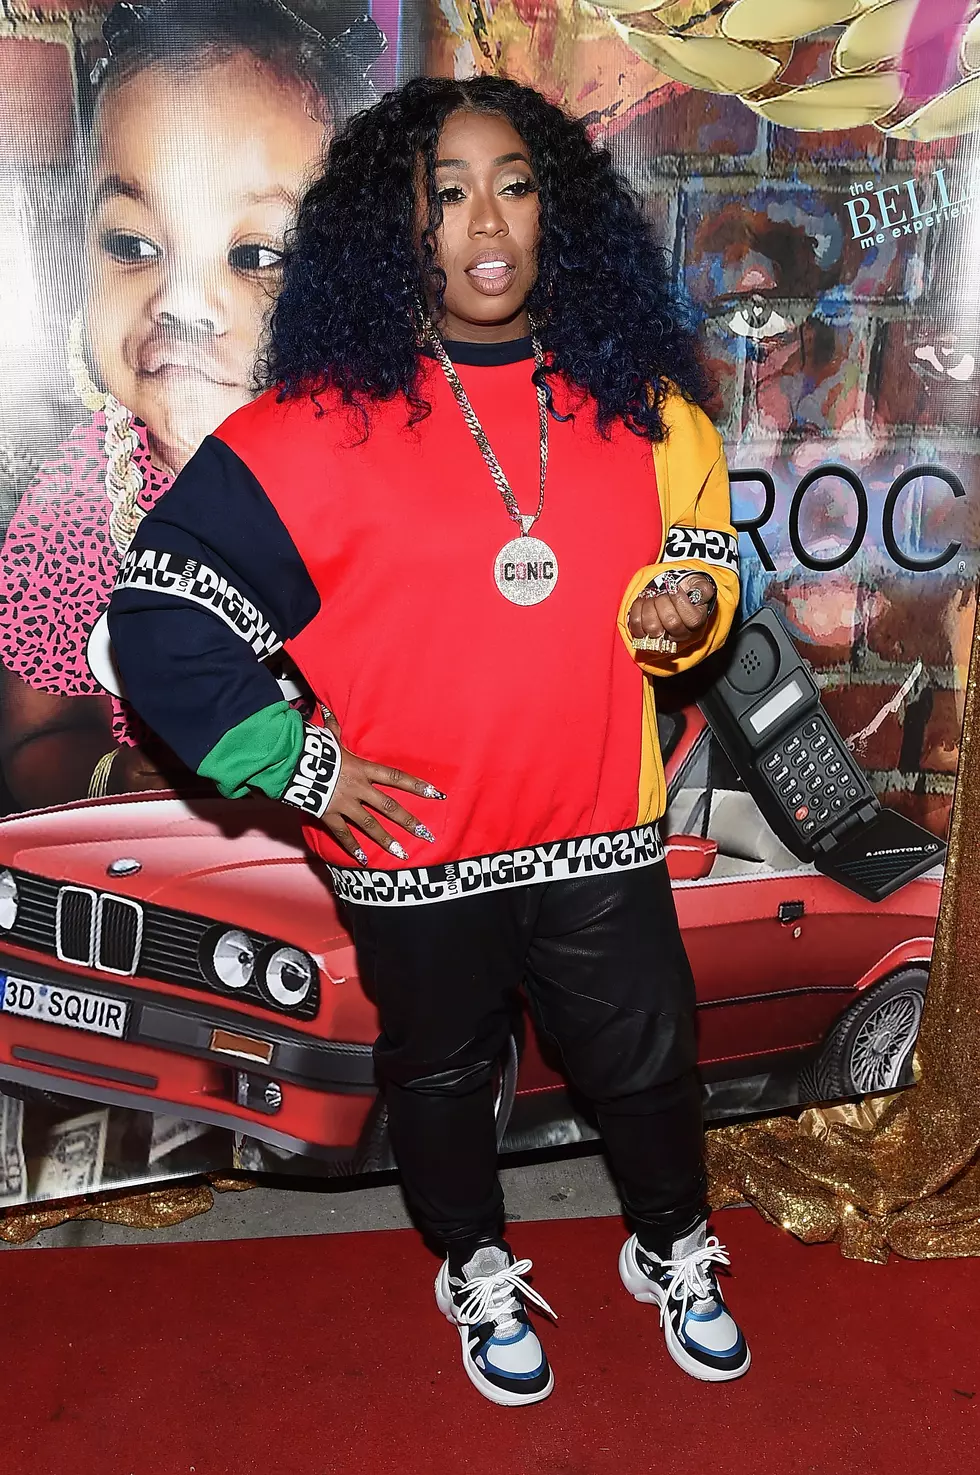 Missy Elliott Becomes The First Female Rapper Nominated For The Songwriters Hall of Fame